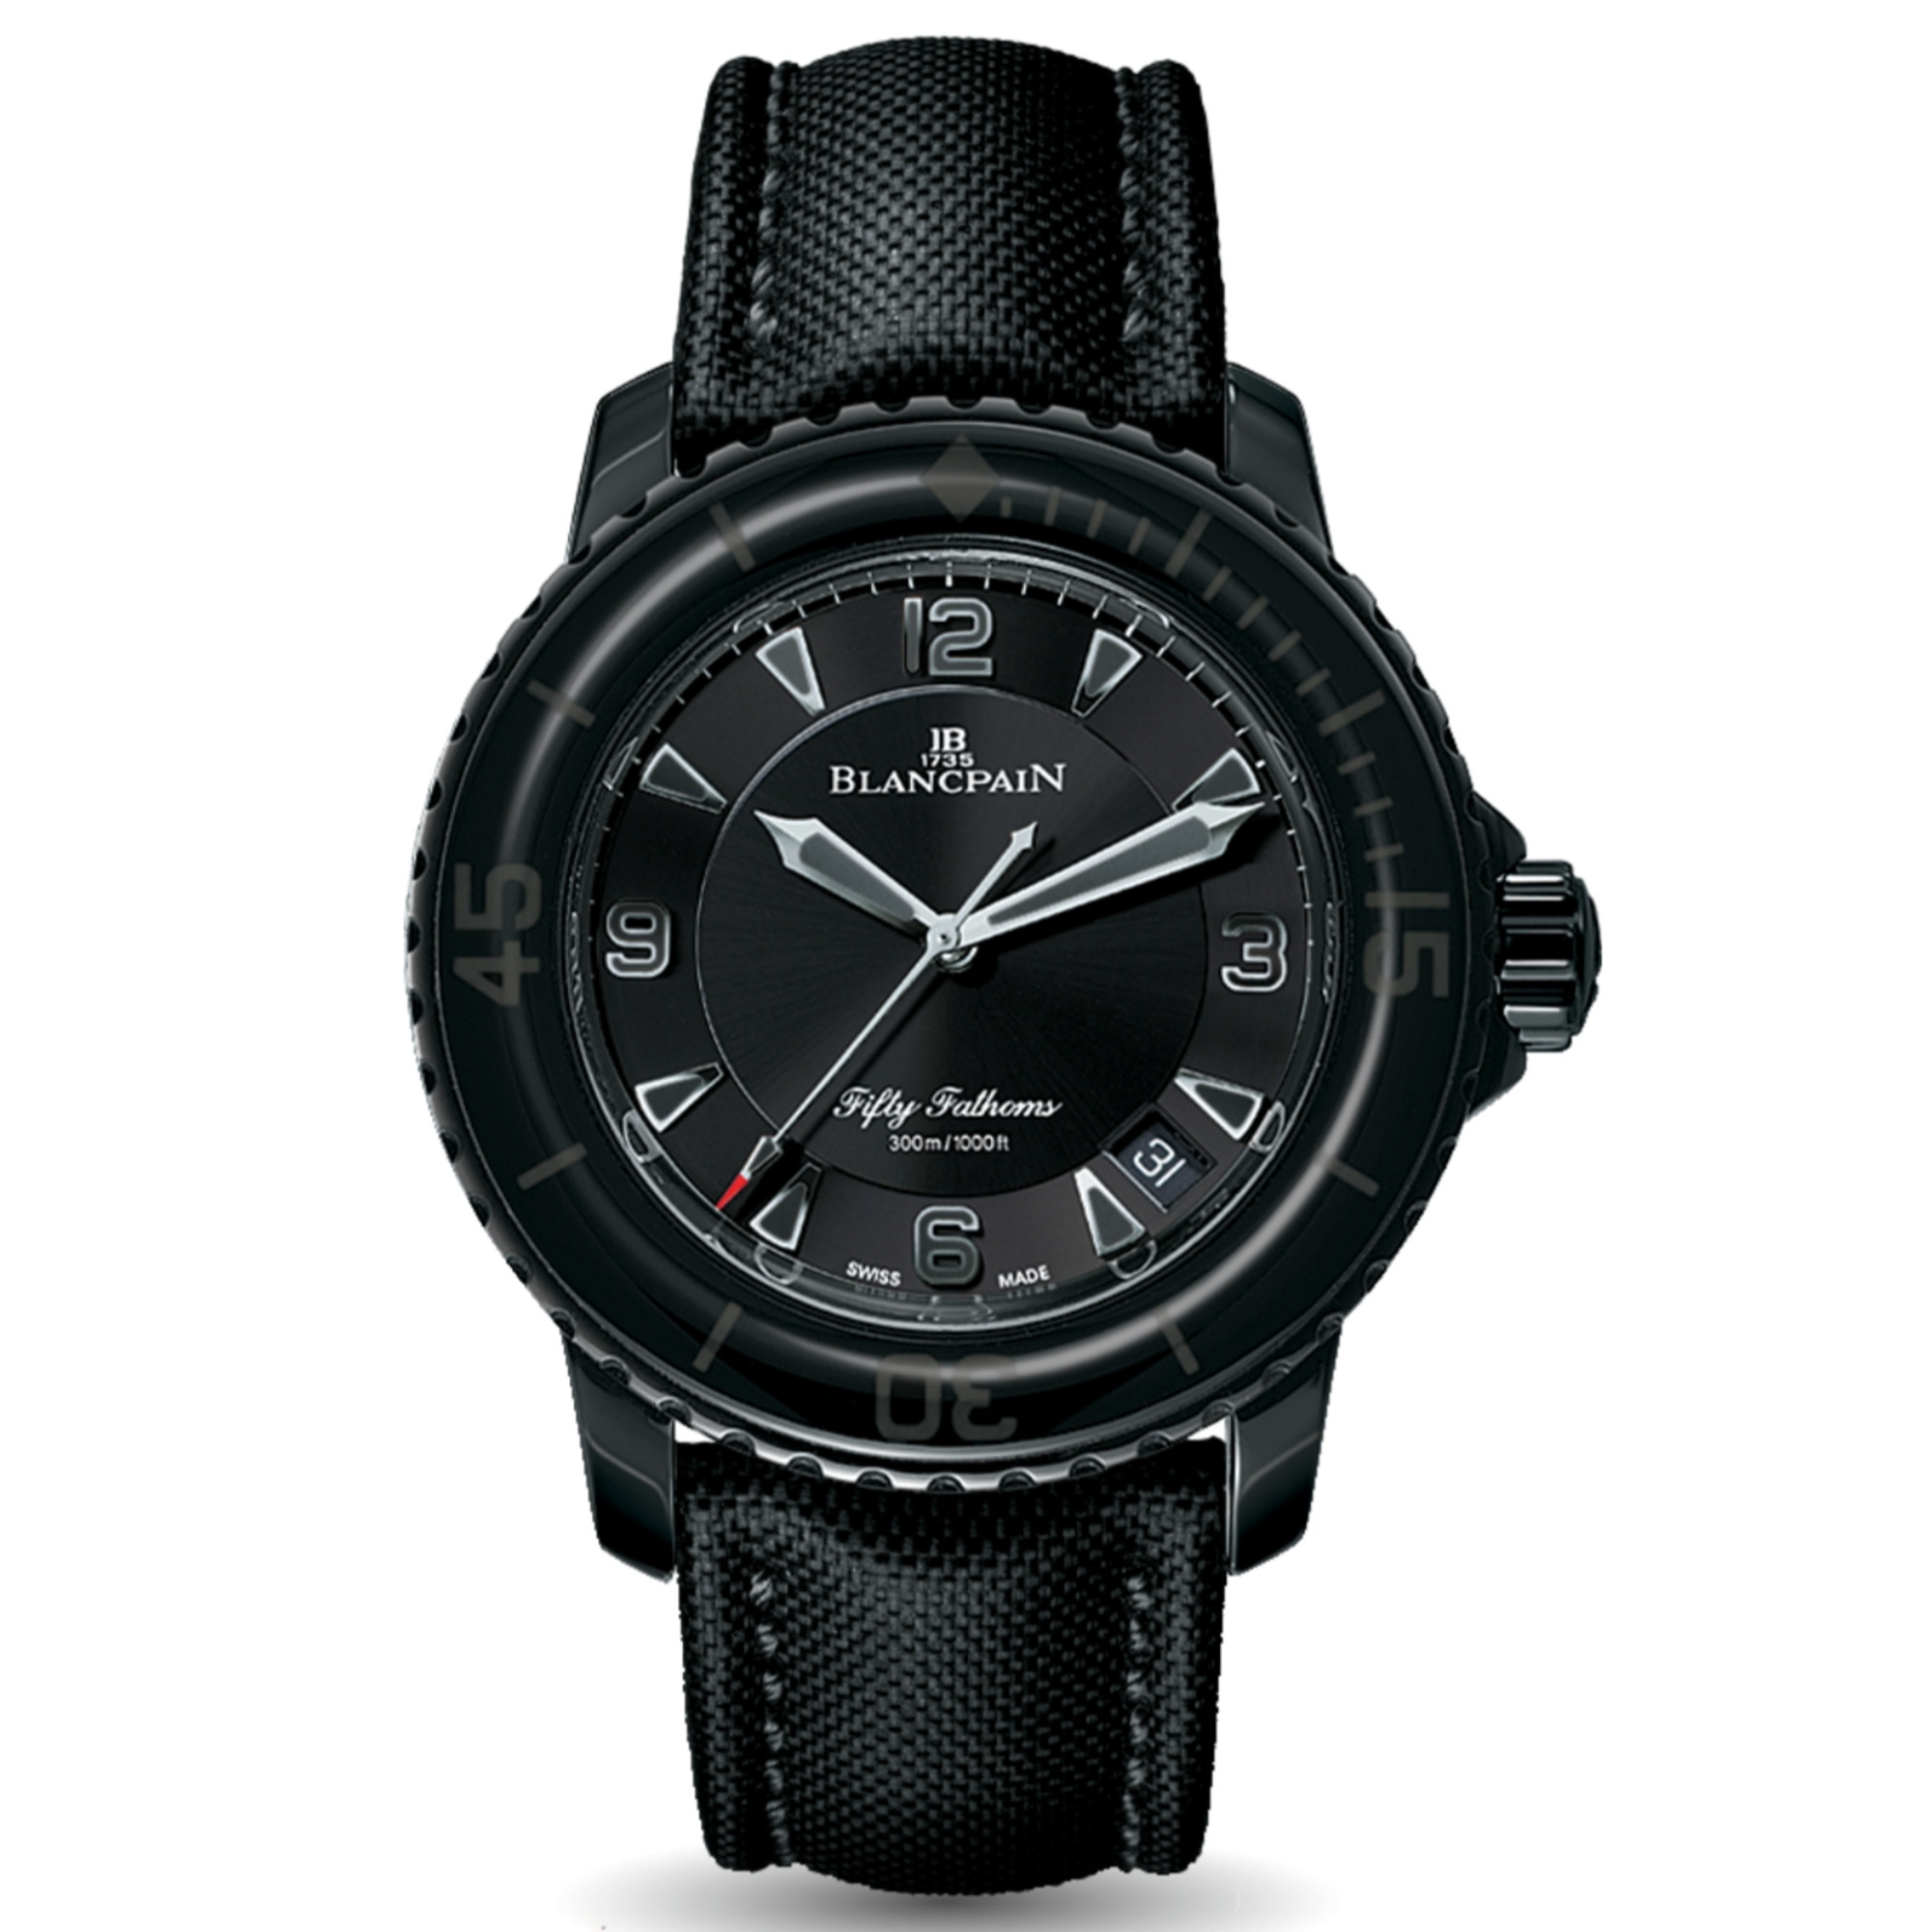 New Blancpain Fifty Fathoms Automatique Black PVD